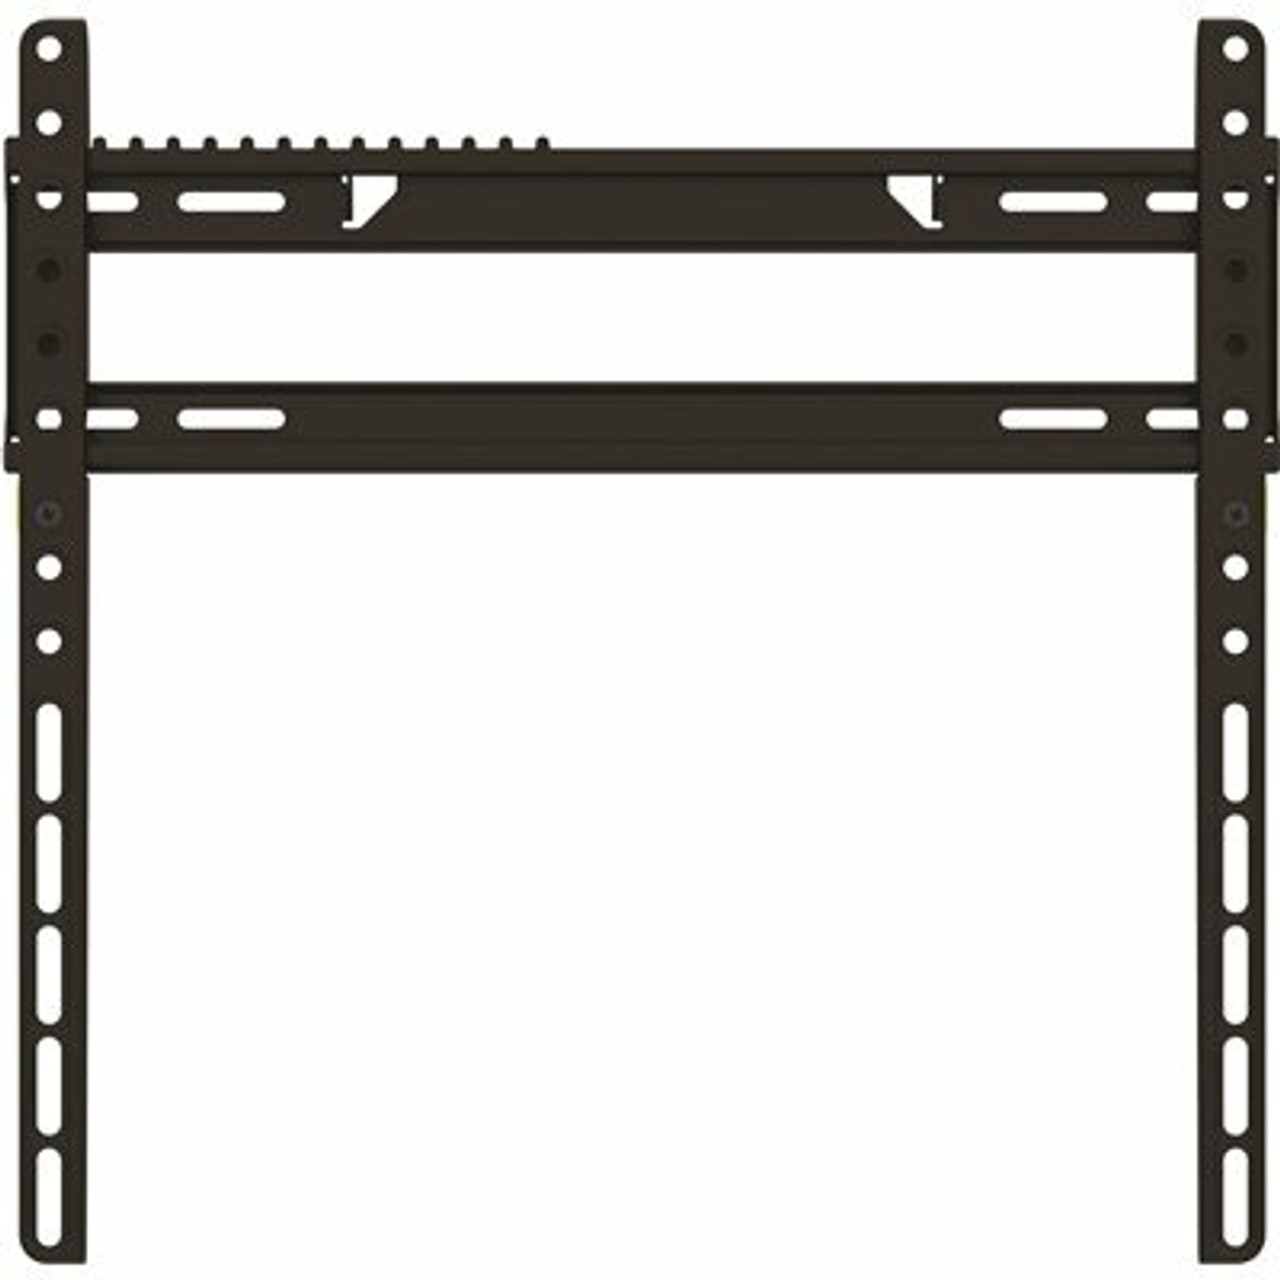 Avf Eco-Mount Flat, Low-Profile Wall-Mount For 32 - 55 In. Tvs